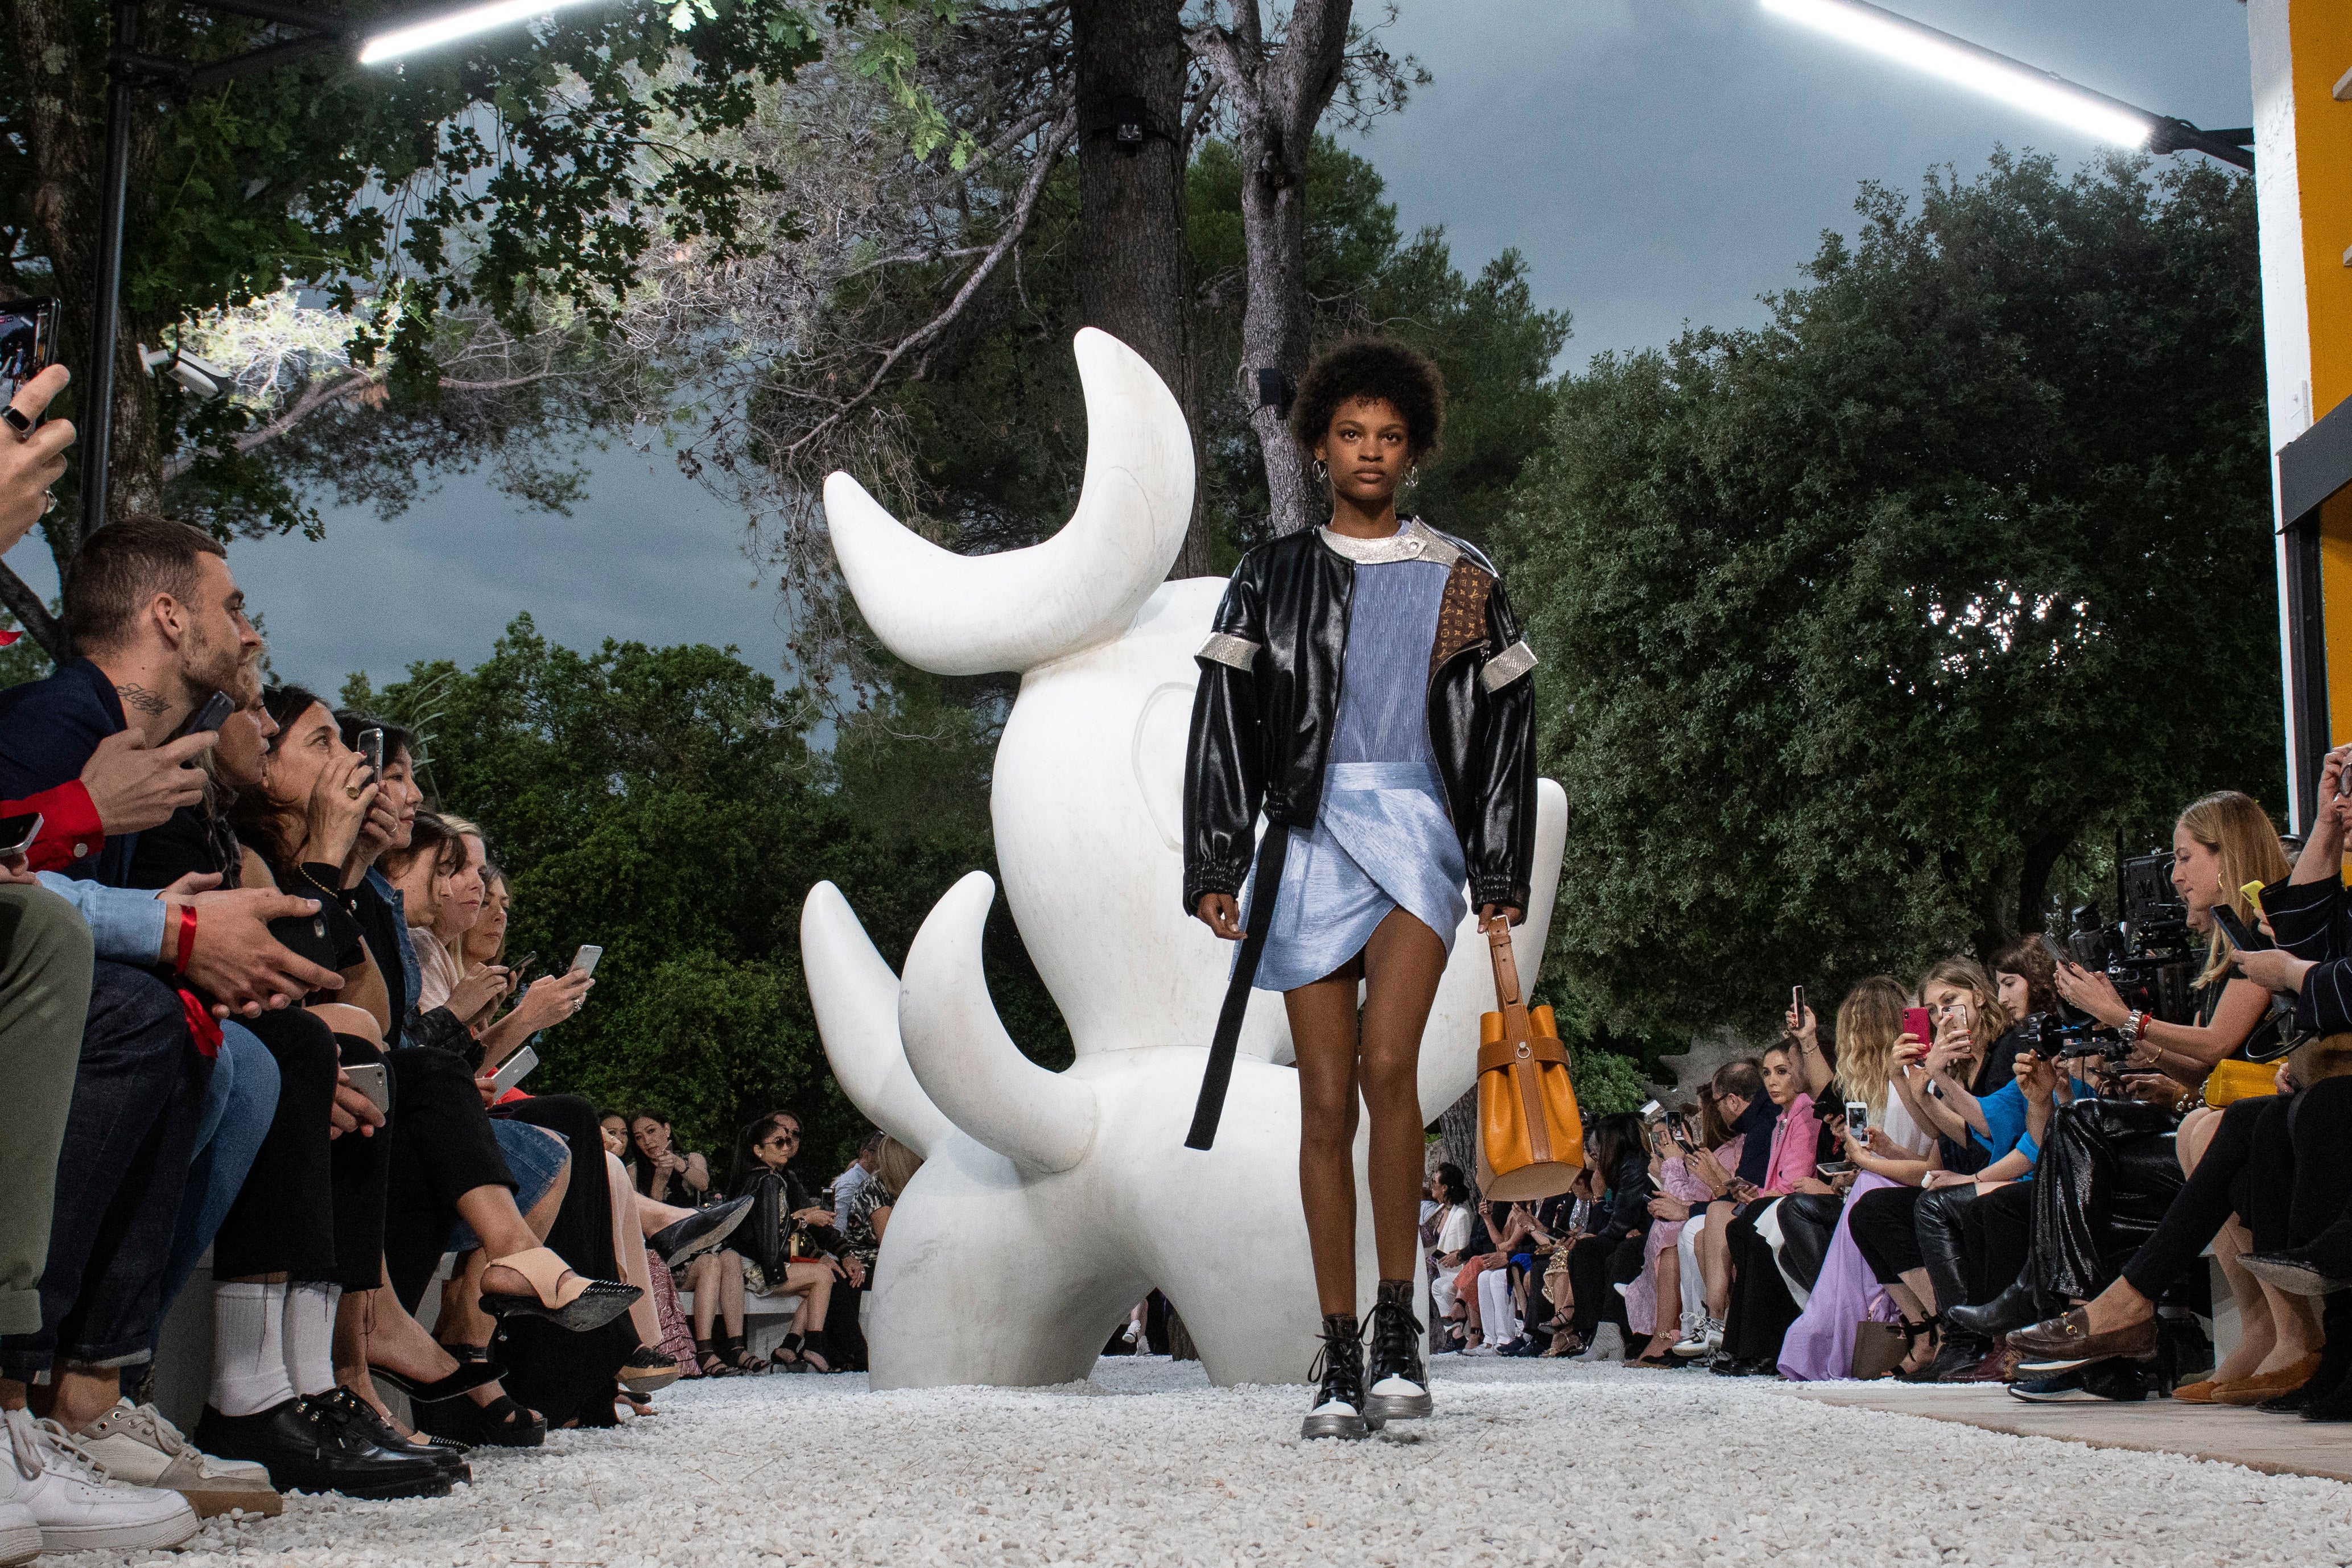 Janaye Furman Is the First Black Woman to Open the Louis Vuitton Show